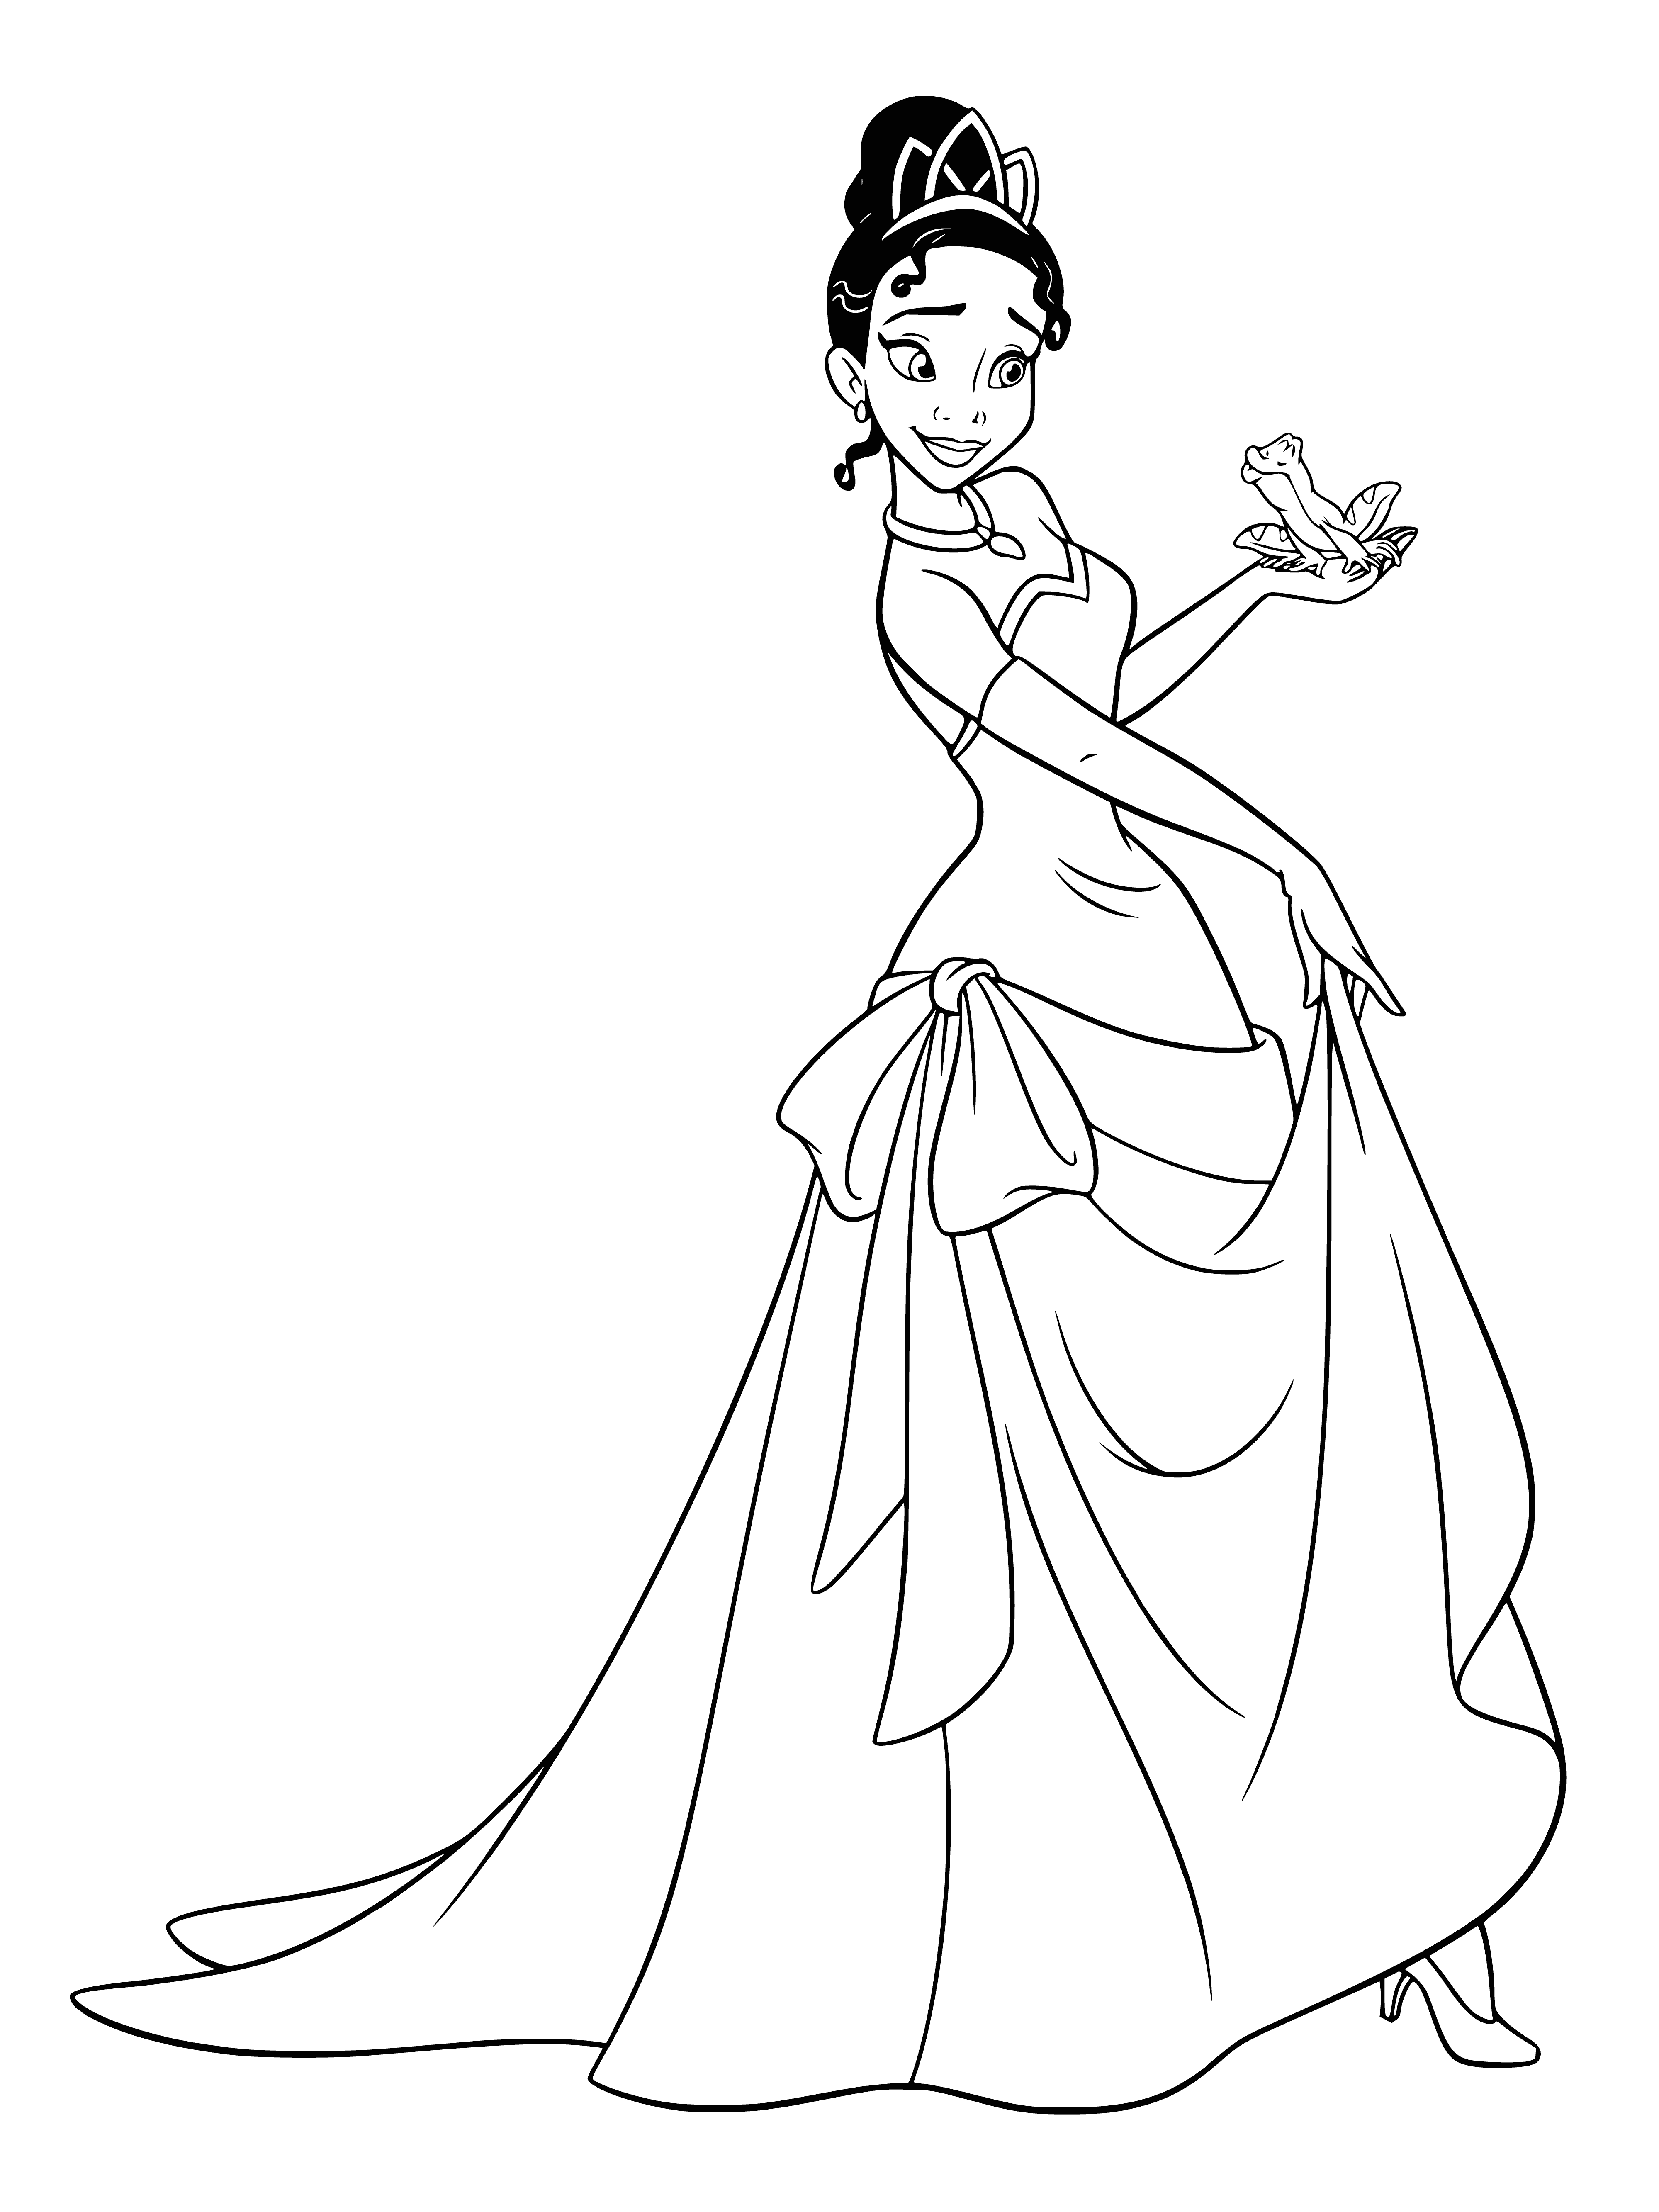 coloring page: Young Black Princess Tiana kneels with a green frog in her hands, with a fierce look & happy frog, set against a purple flower under a deep blue sky.